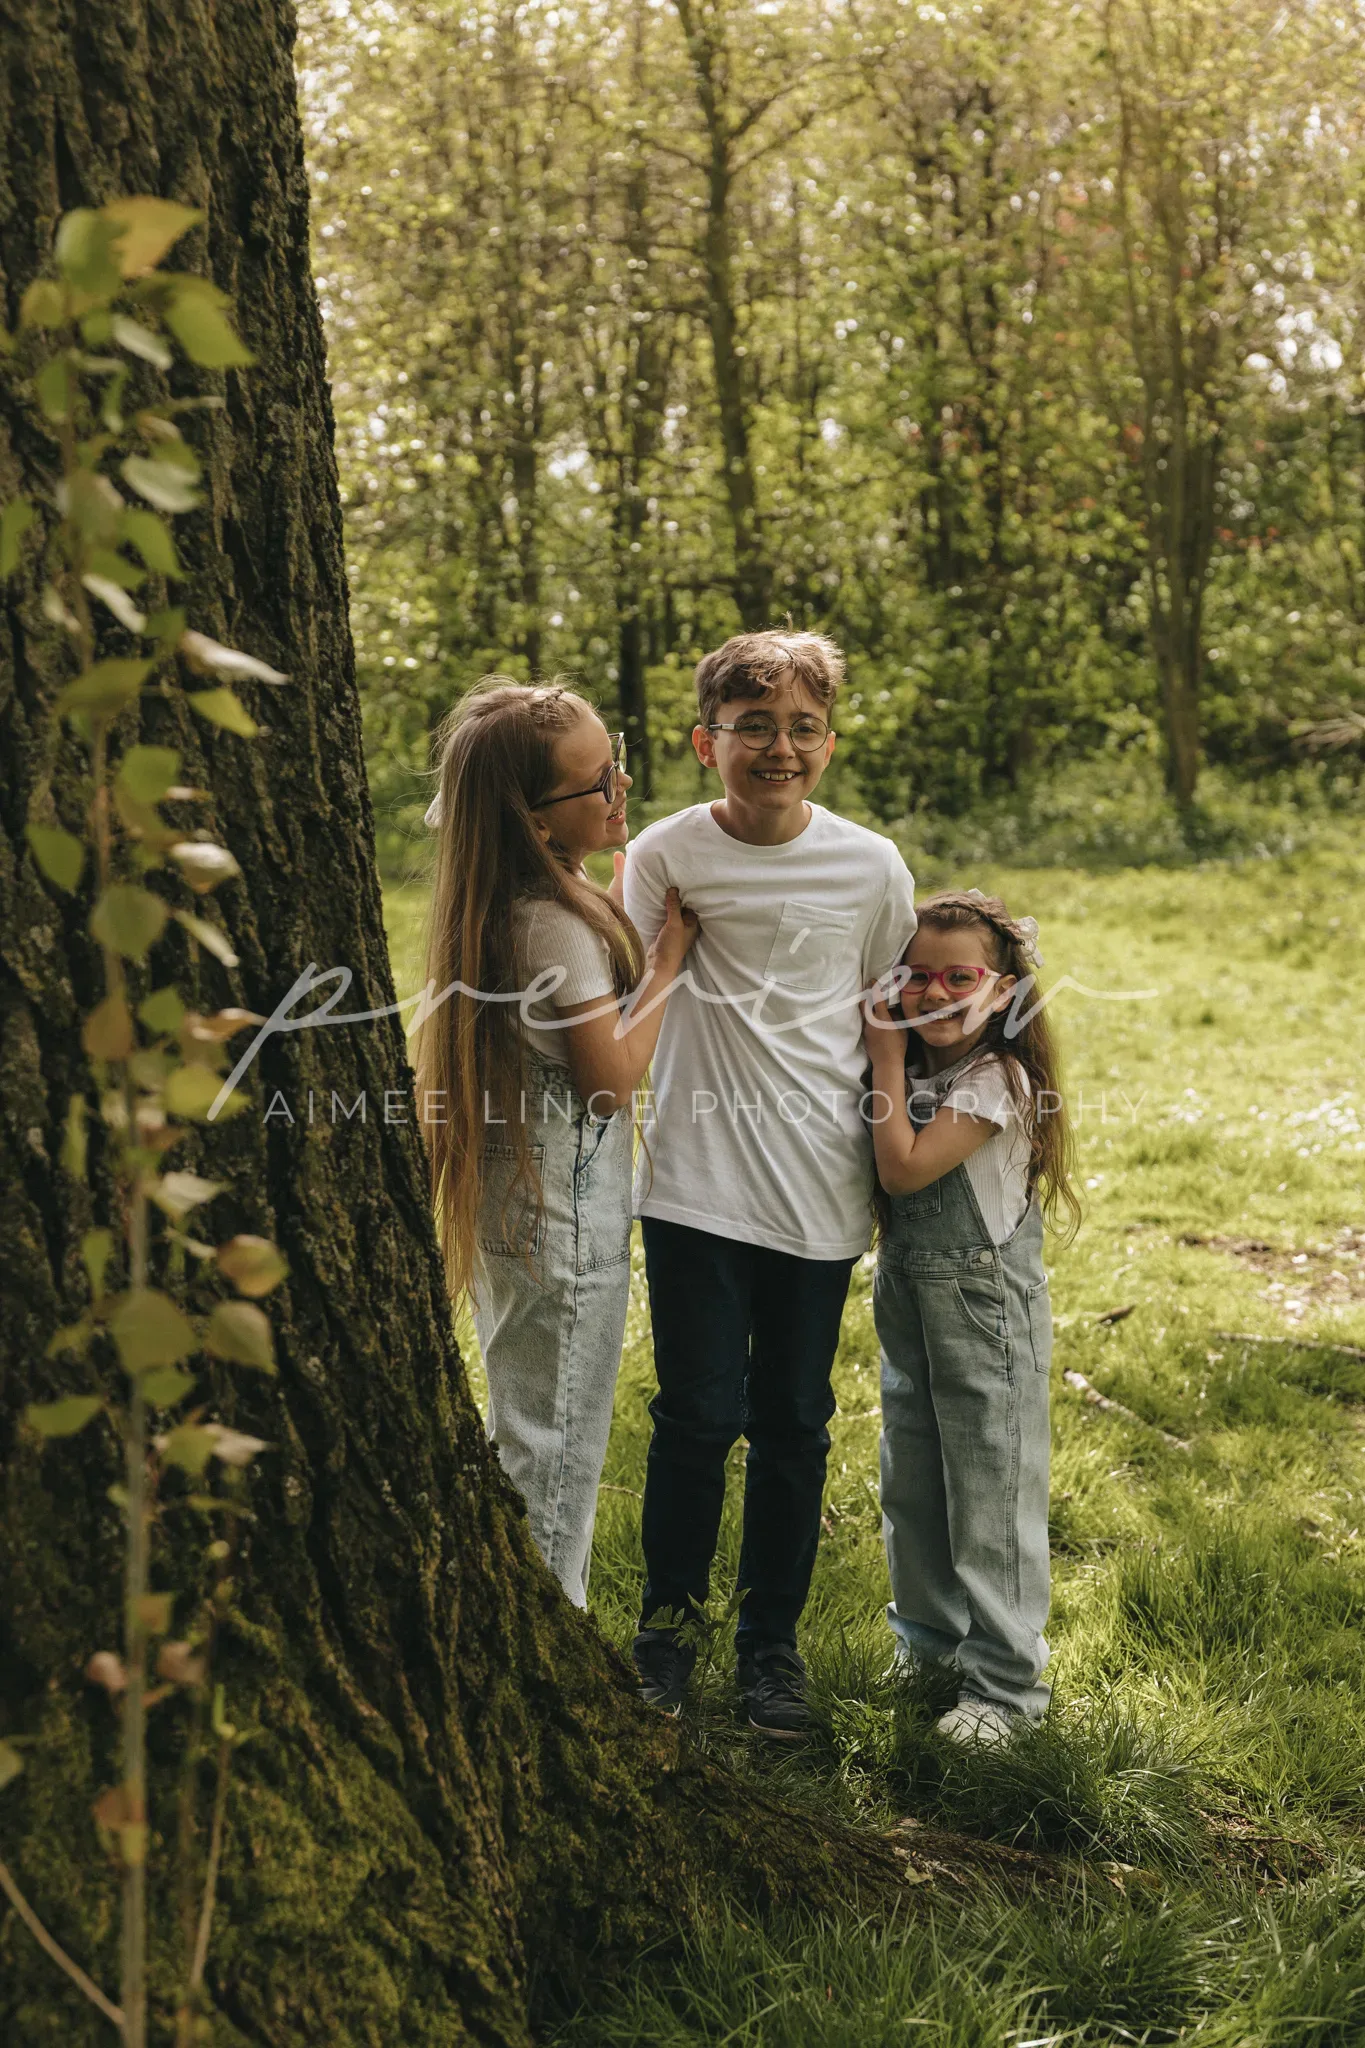 Three children laughing together in a lush green forest. two girls lean on a tree on either side of a boy, all in casual attire, surrounded by vibrant greenery and soft sunlight filtering through leaves.